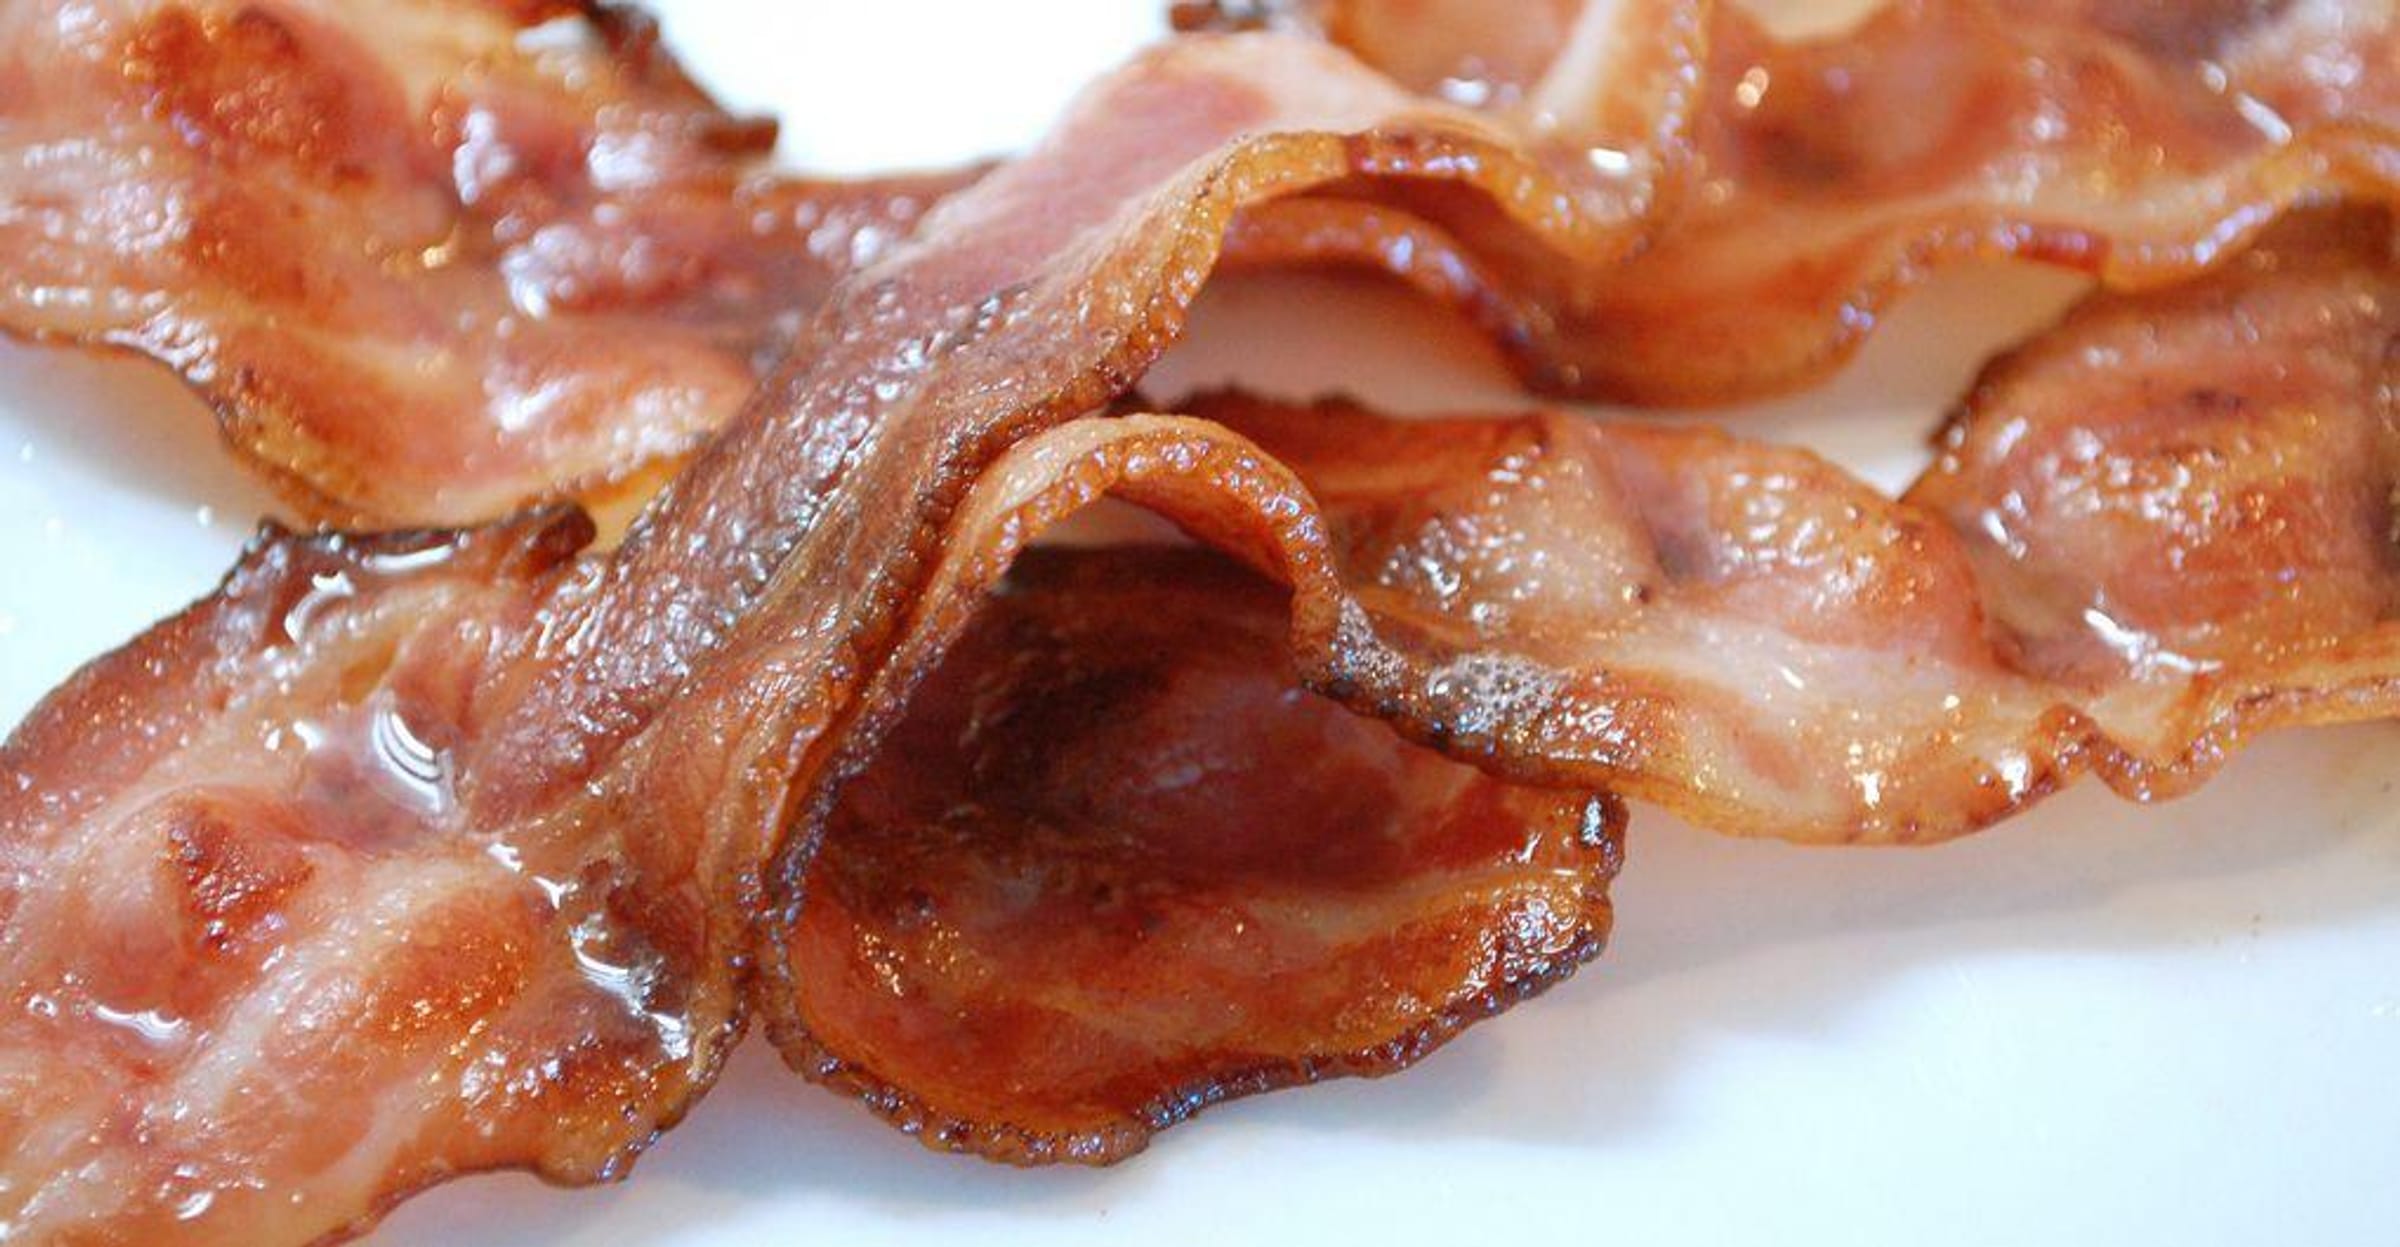 From fish to bacon, a ranking of animal proteins in order of